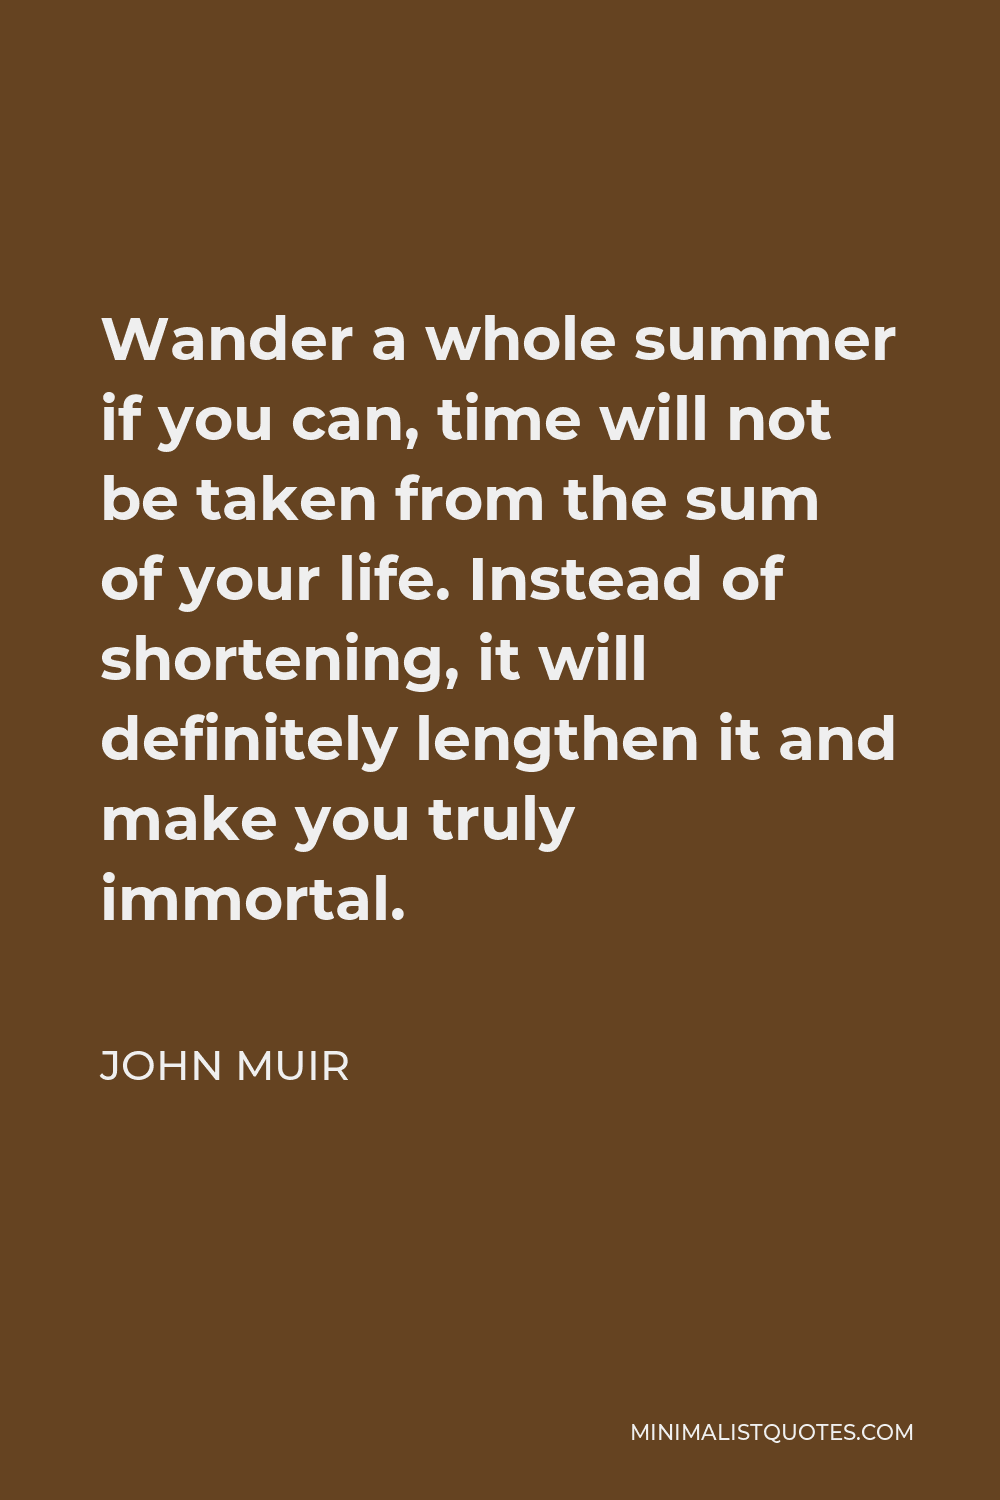 John Muir Quote - Wander a whole summer if you can, time will not be taken from the sum of your life. Instead of shortening, it will definitely lengthen it and make you truly immortal.